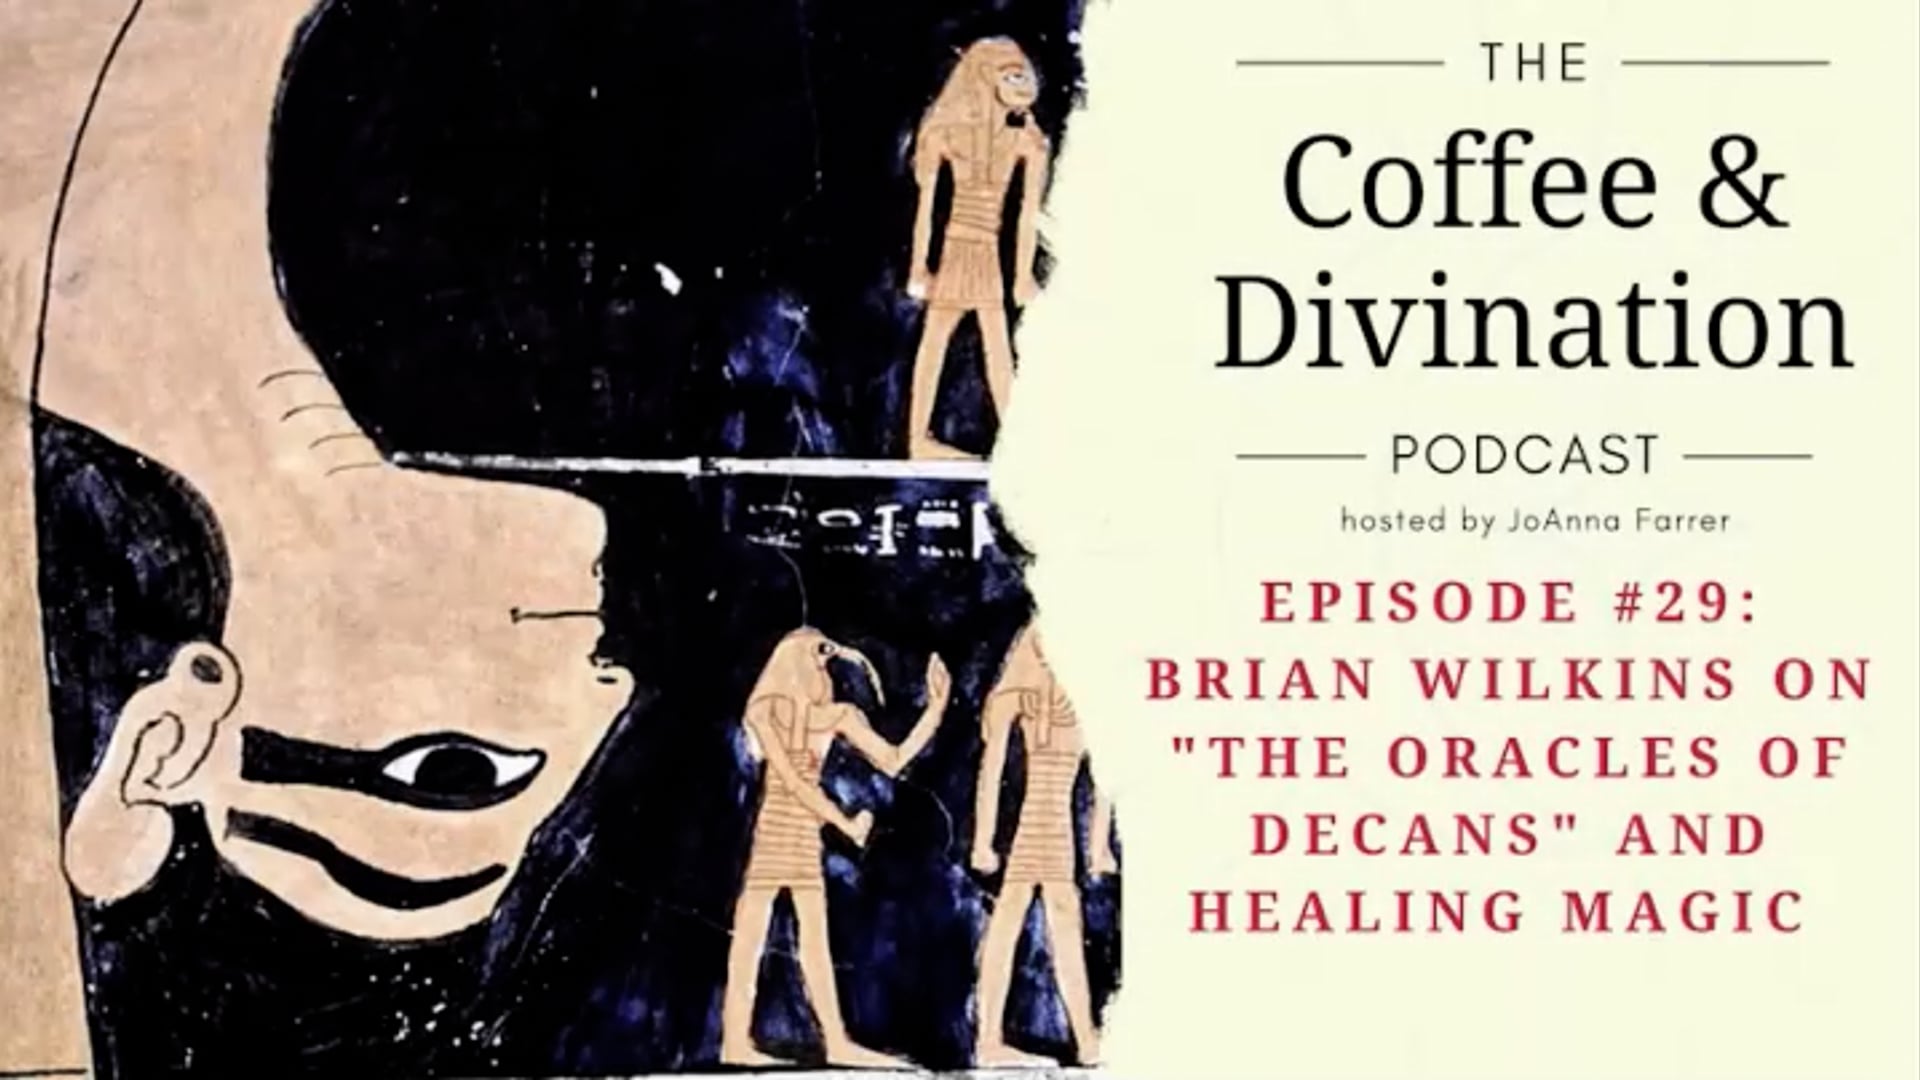 Episode #29: Brian Wilkins on "The Oracle of Decans" and Healing Magic